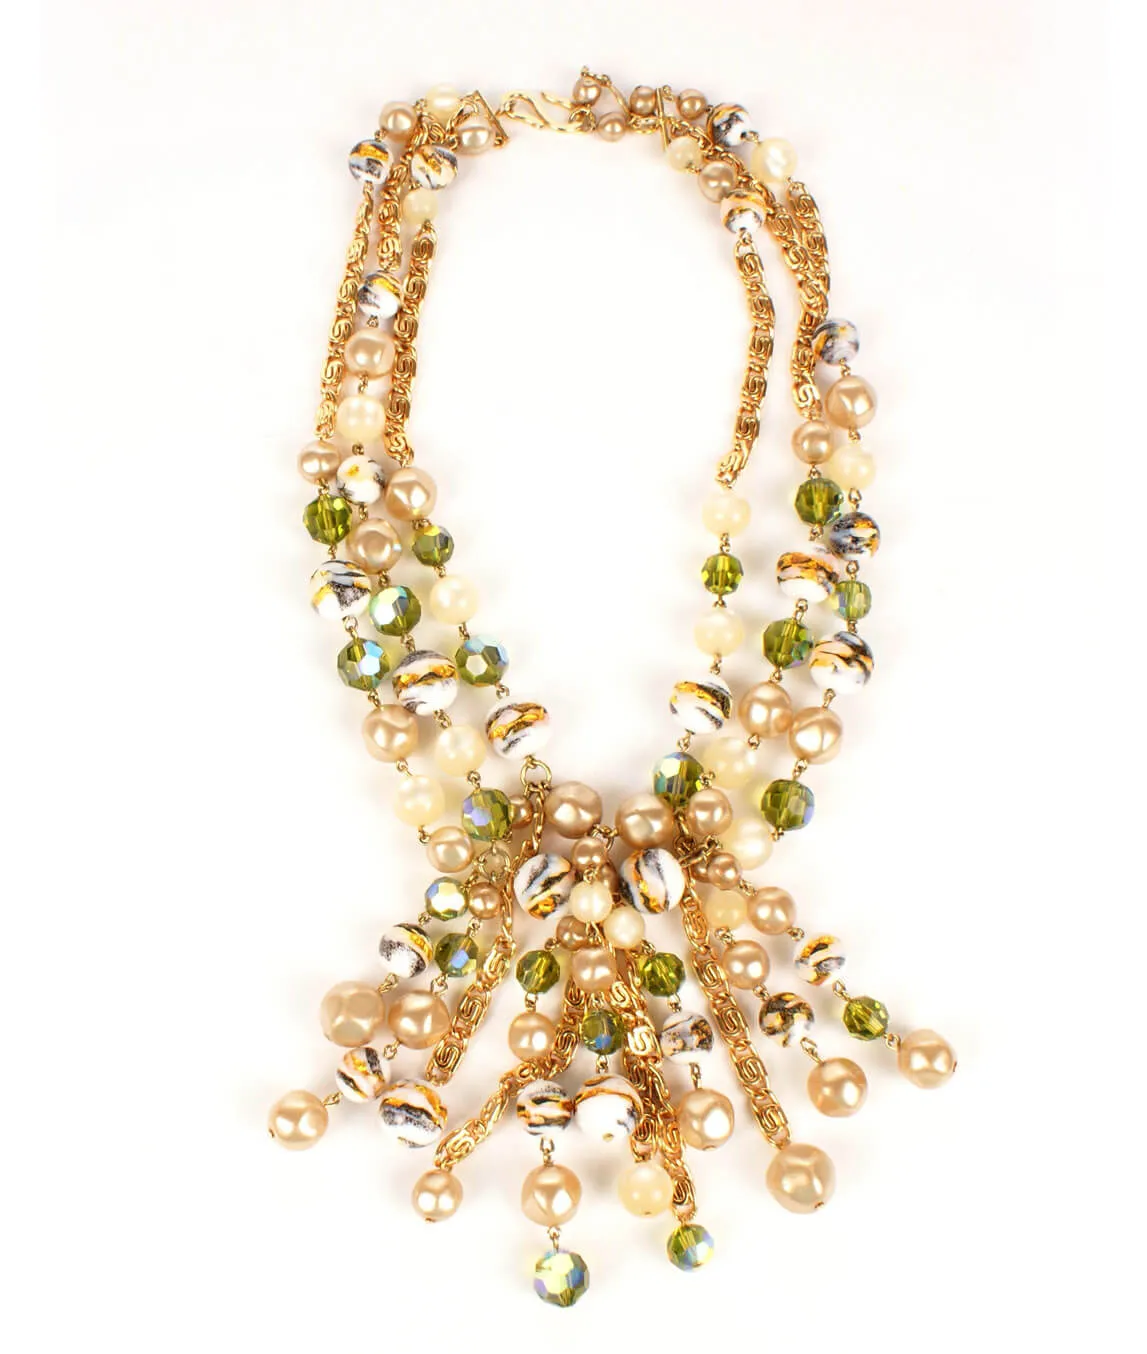 1961 Dior beaded necklace